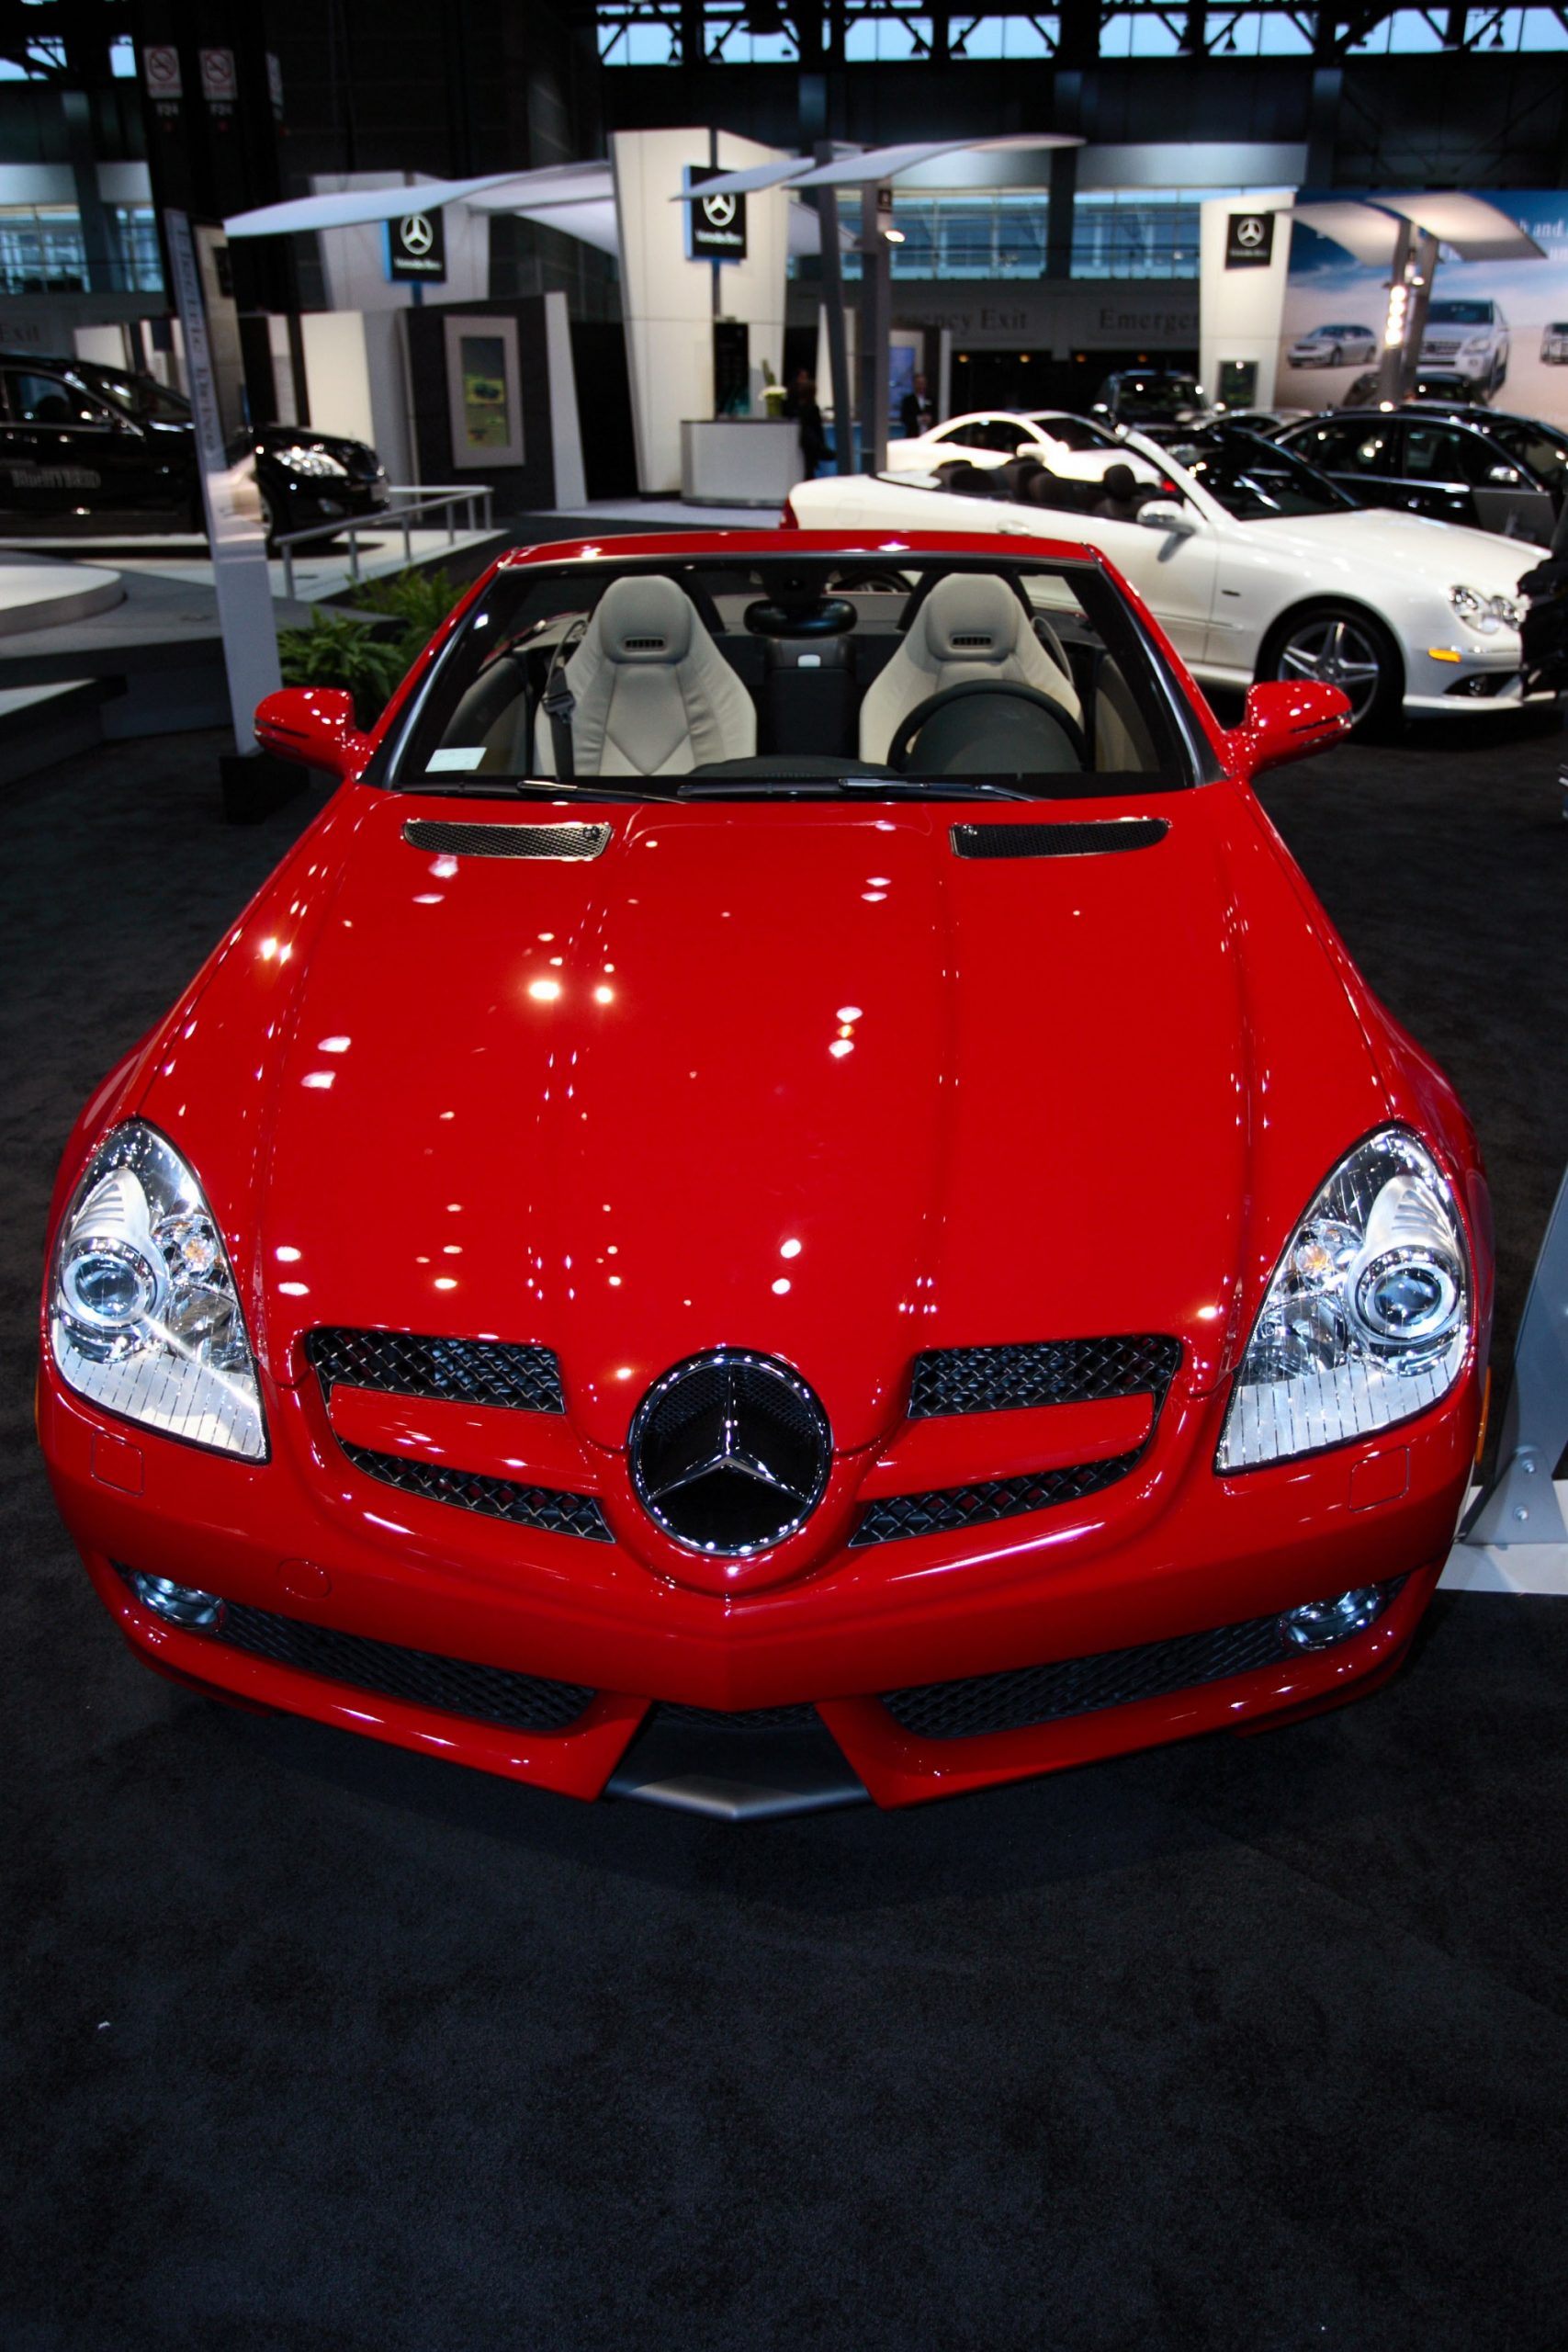 The front view of a red 2009 Mercedes SLK 55 AMG at a car show